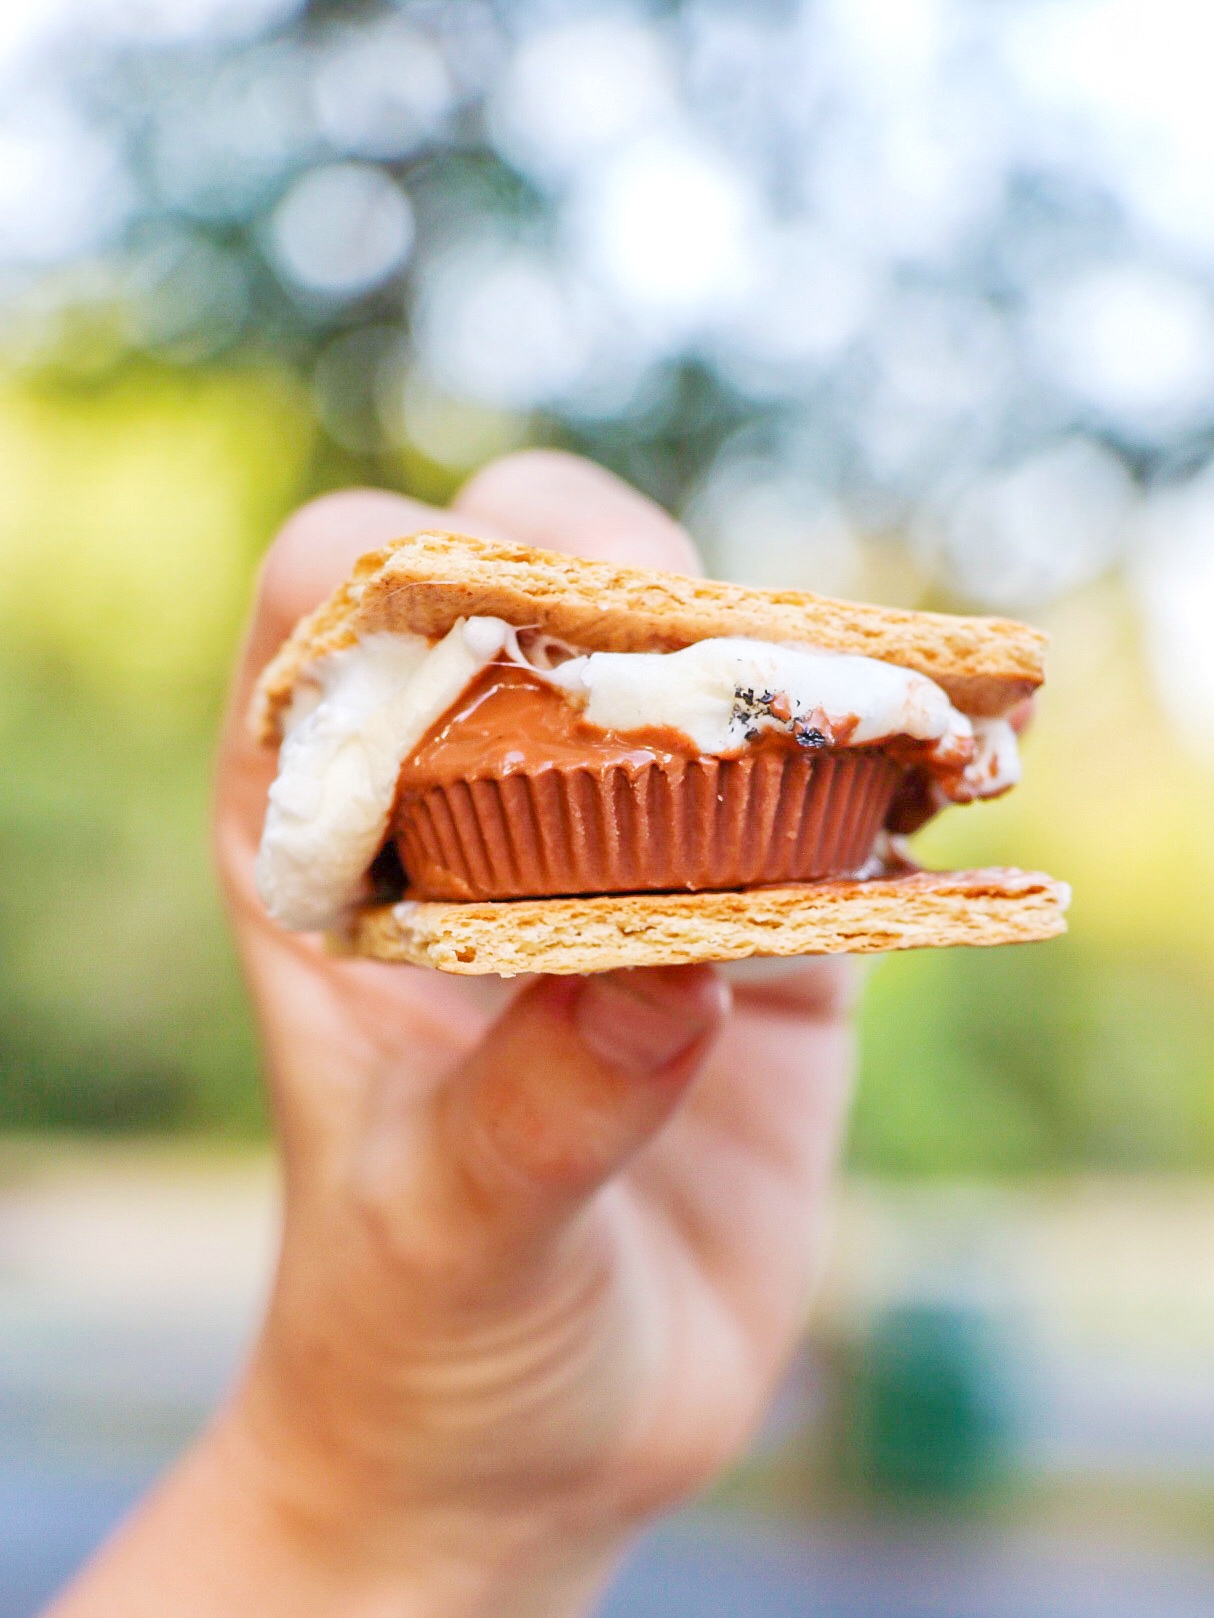 Creative s'more idea: Reese's cup s'mores